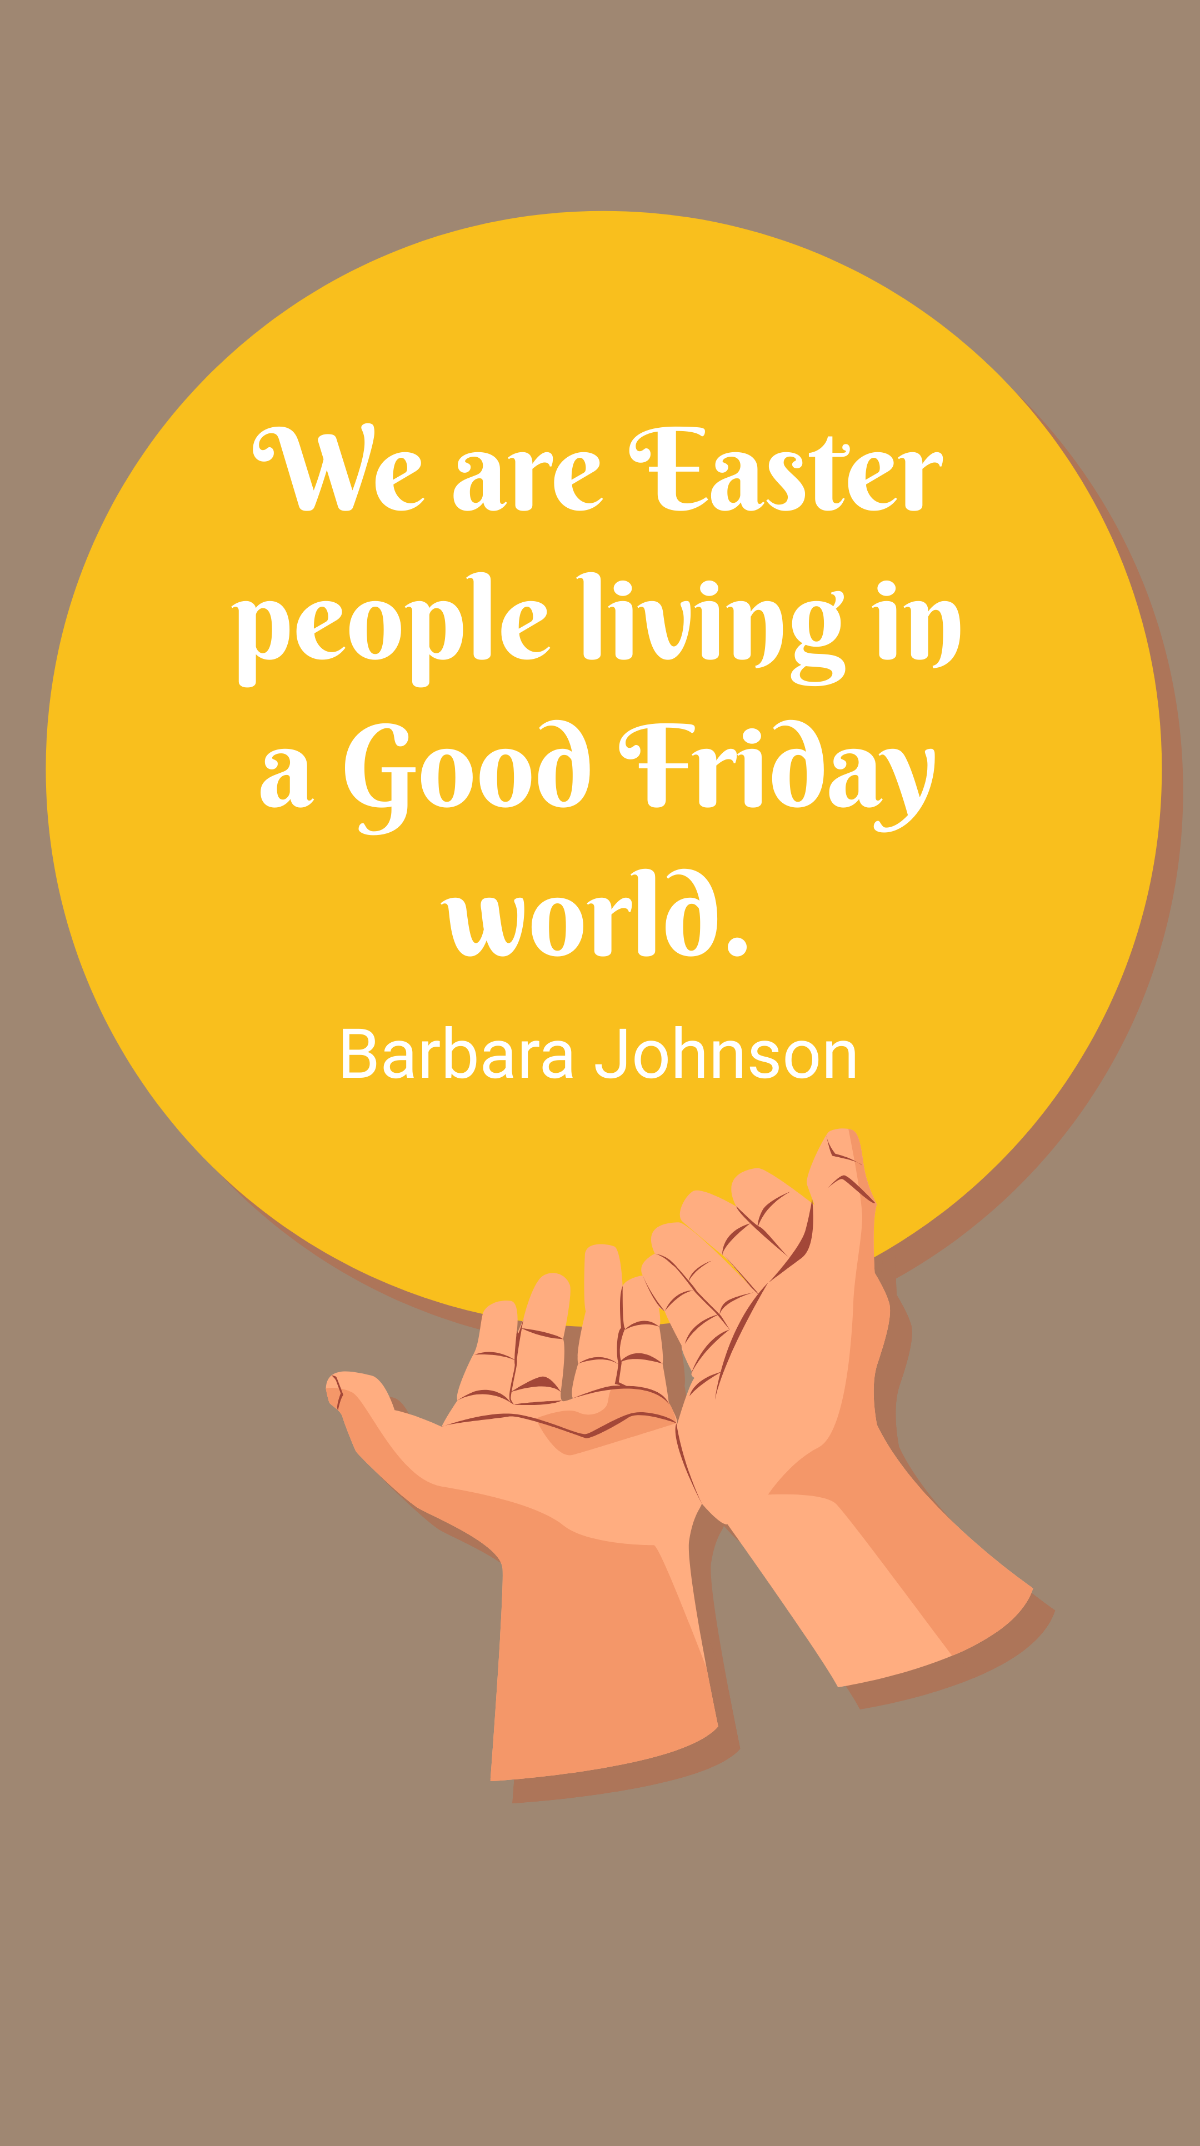 Barbara Johnson - We are Easter people living in a Good Friday world. Template